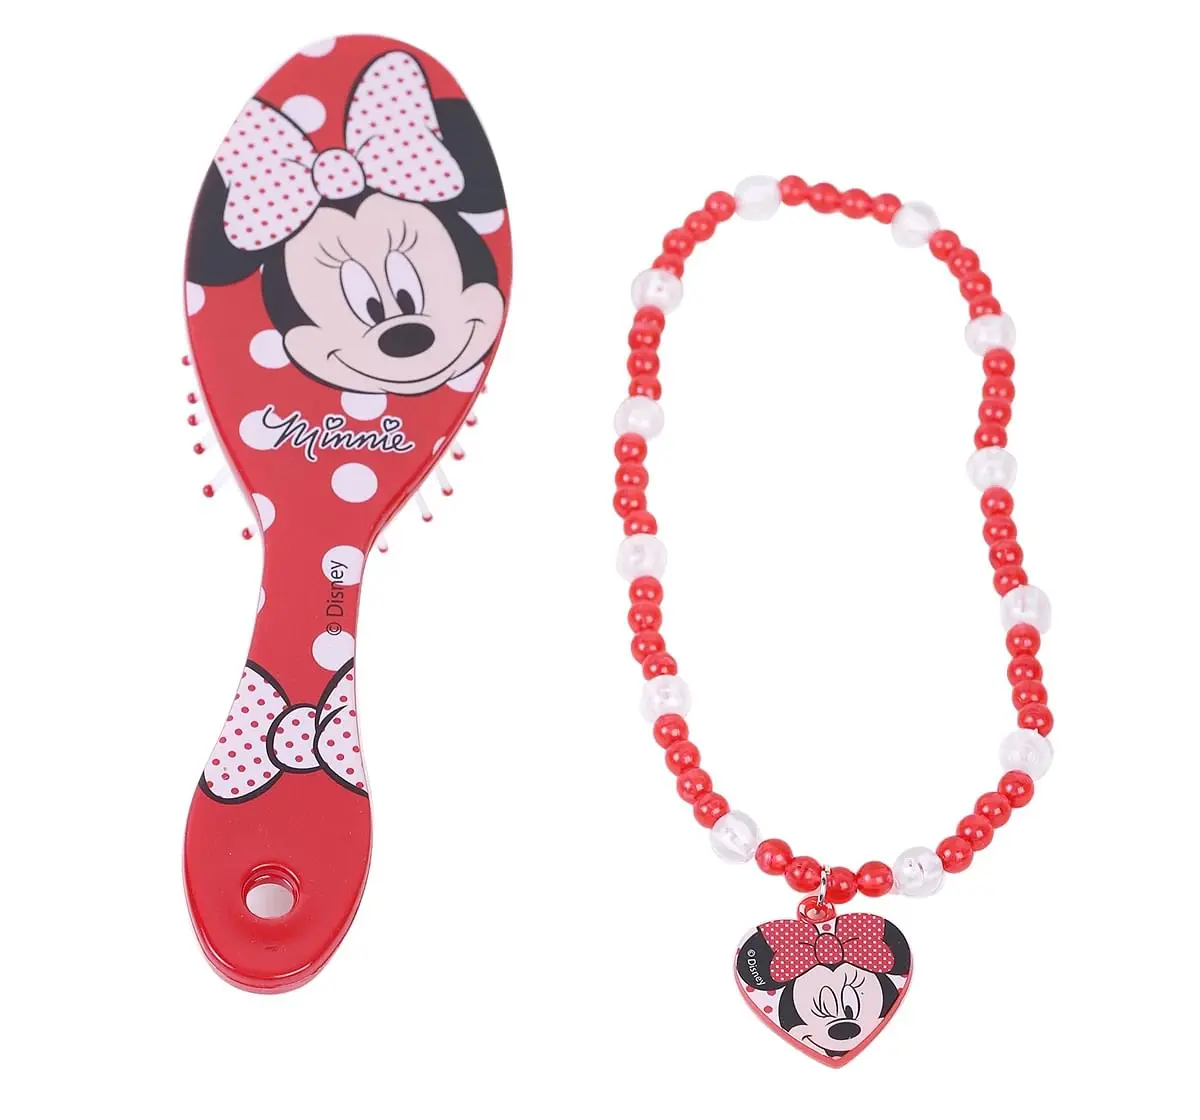 Minnie Mouse Hair Brush With Necklace by Li'l Diva For Girls 3 Years And Above, White & Red